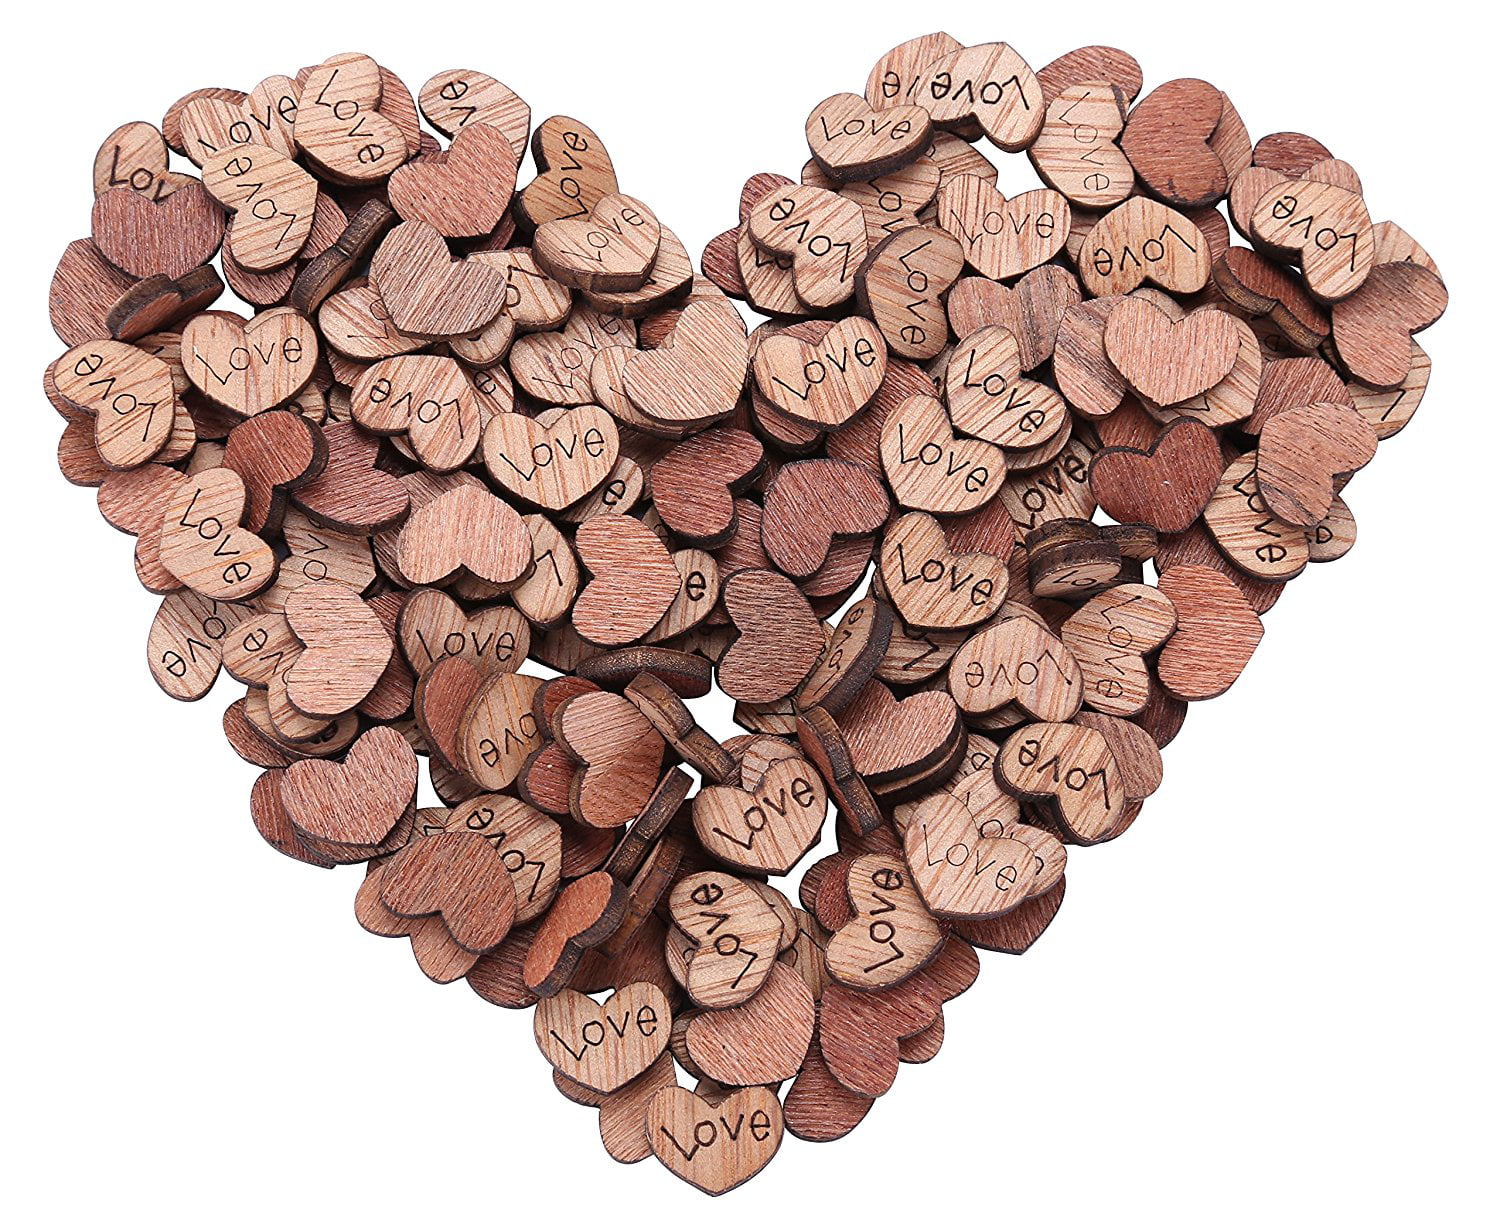 Details about   100 pcs Rustic Wooden Love Heart Wedding Table Scatter Decoration Crafts Party 